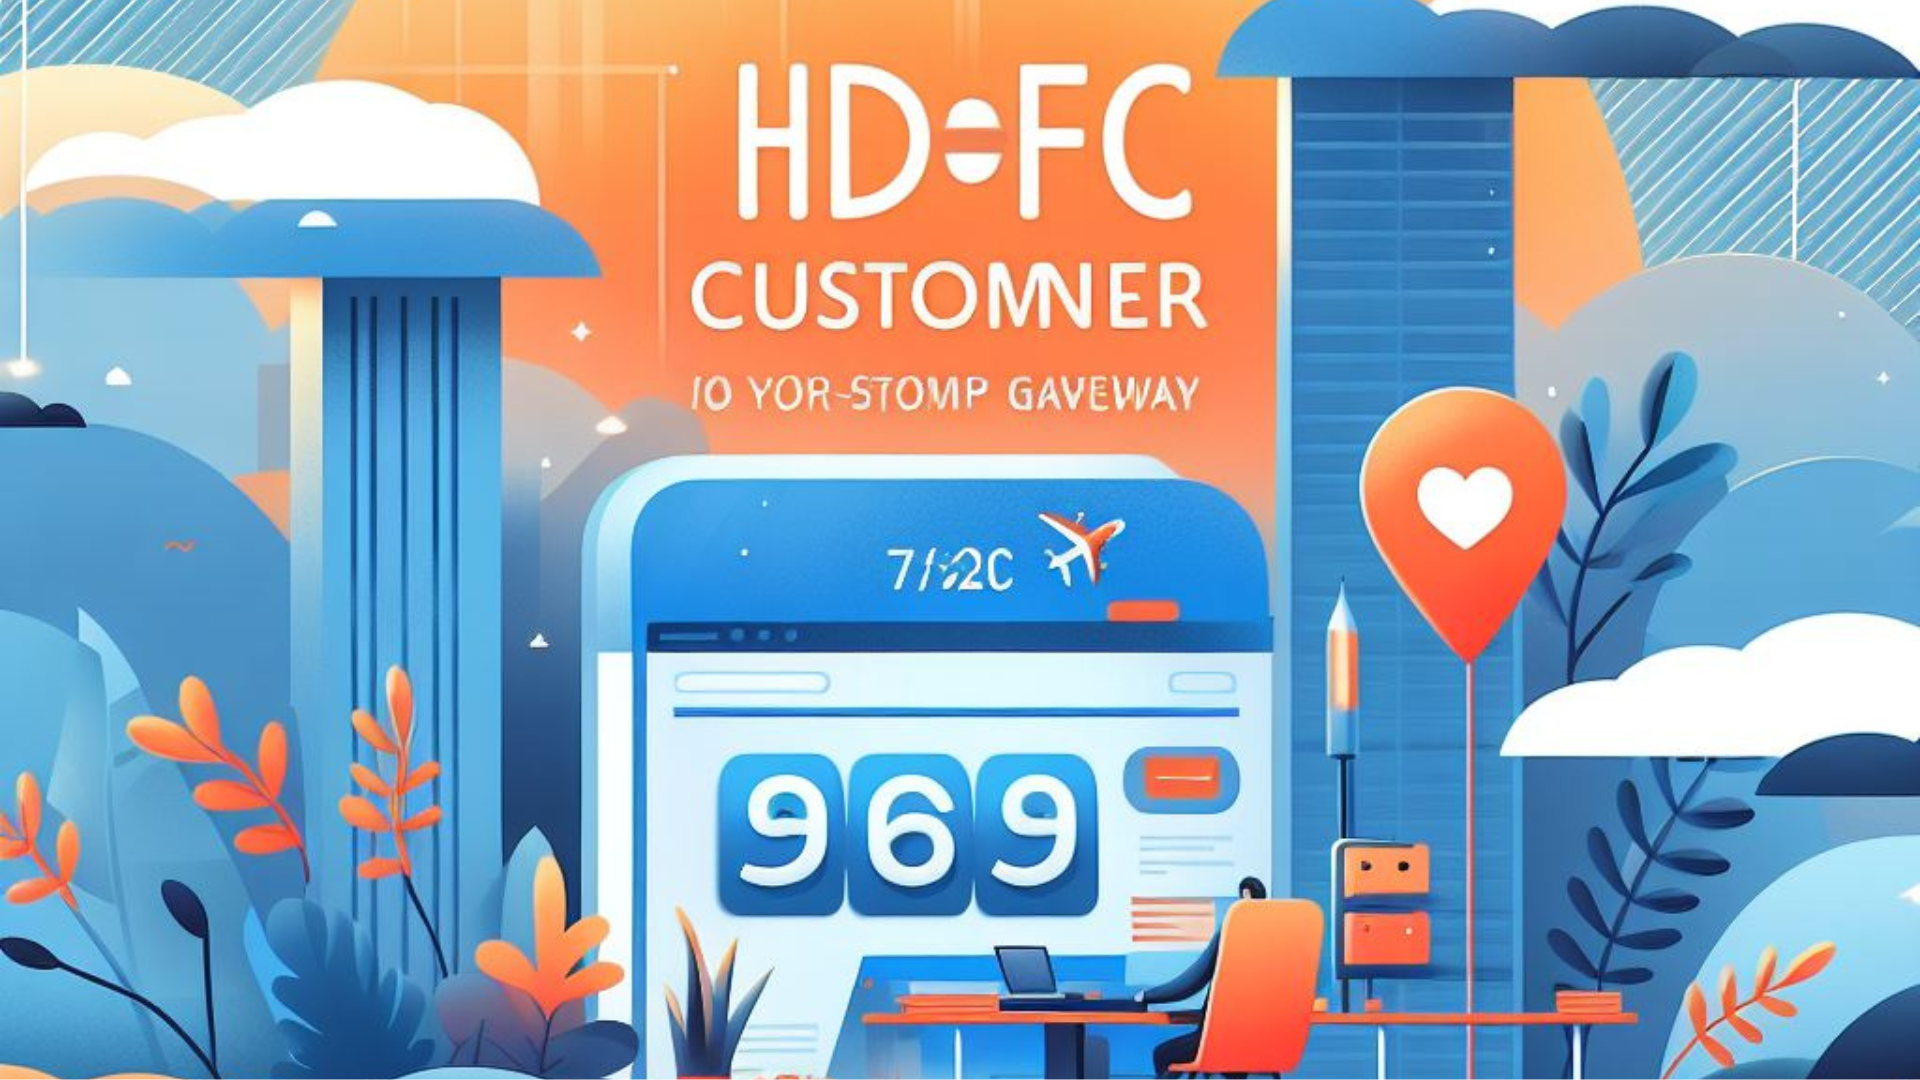 HDFC Customer Care Number